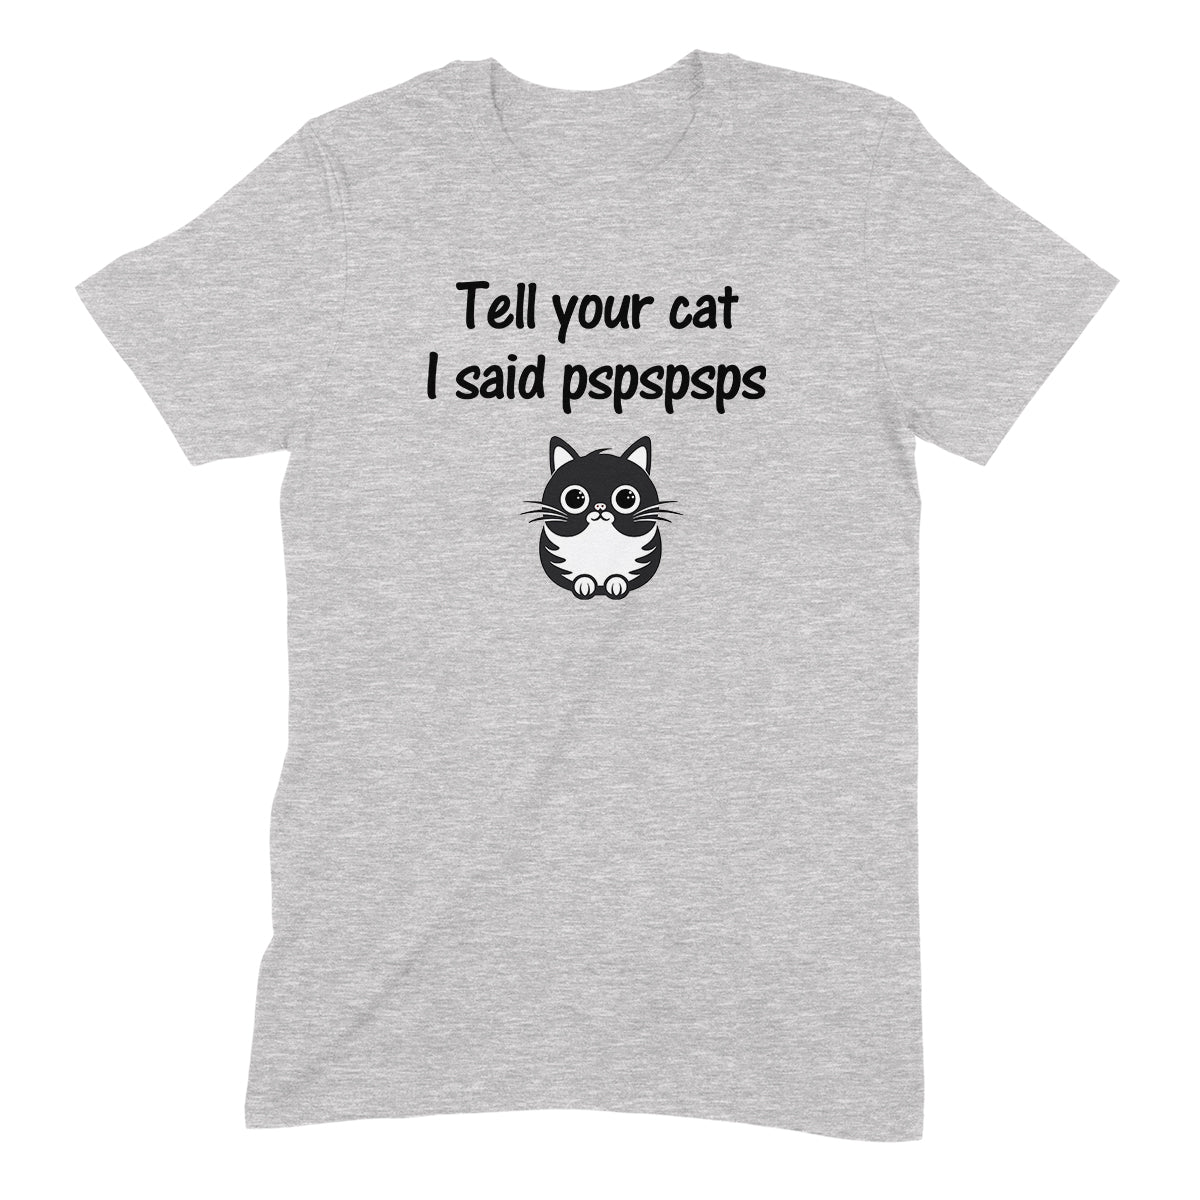 "Tell Your Cat" Premium Midweight Ringspun Cotton T-Shirt - Mens/Womens Fits